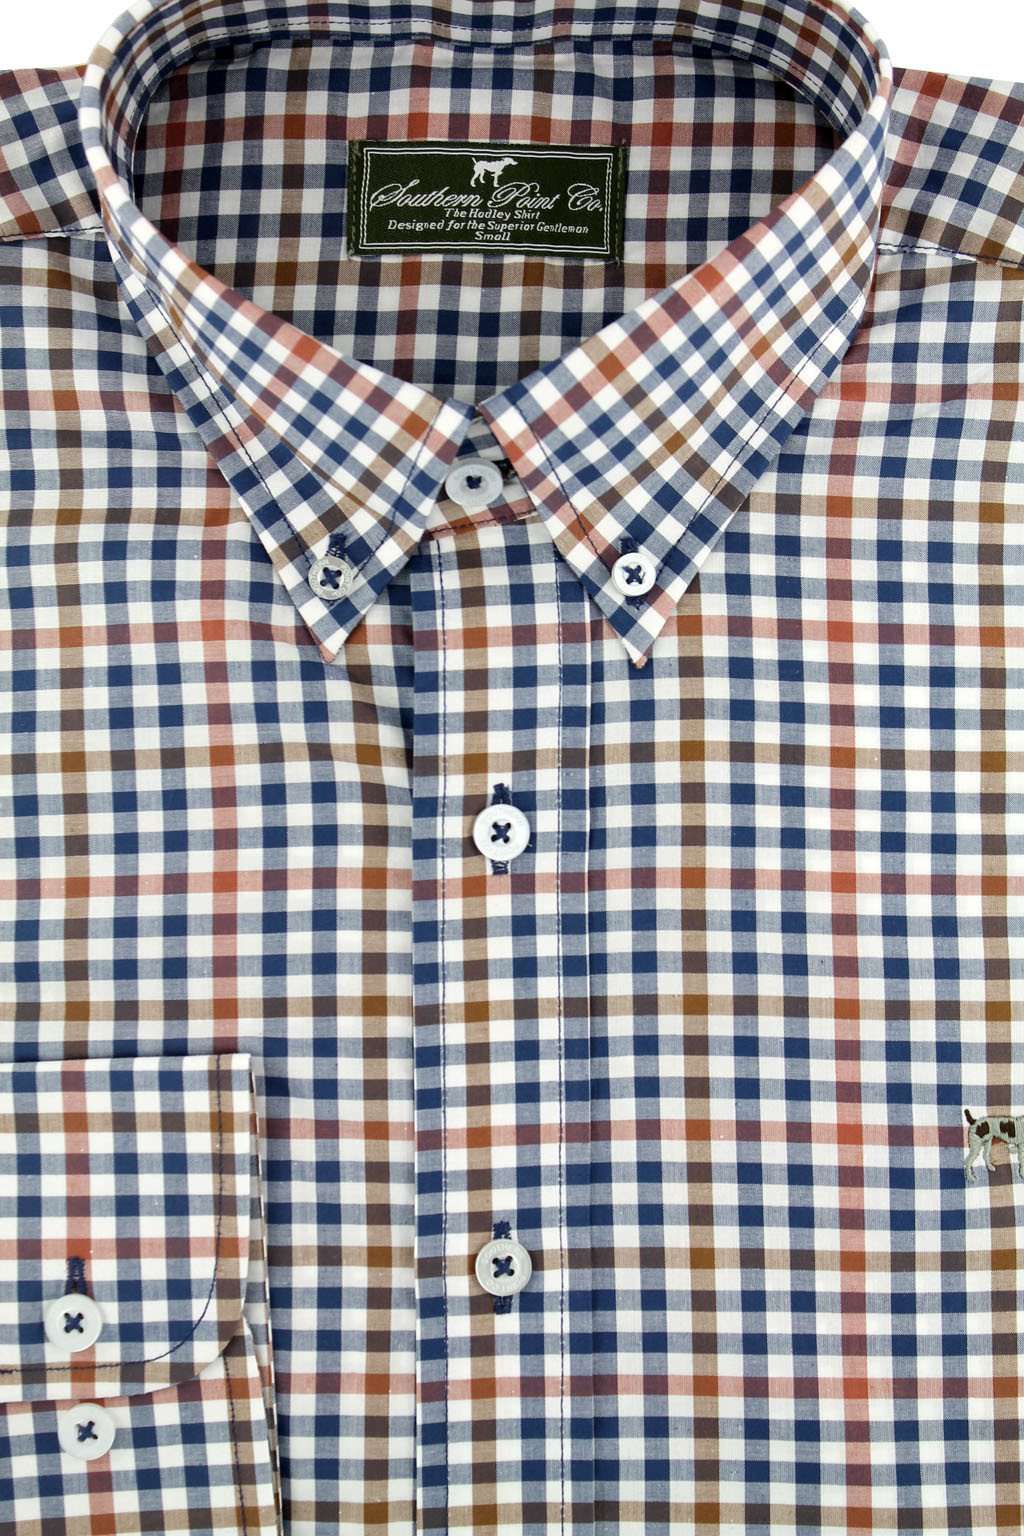 The Hadley Shirt in Midnight Marsh by Southern Point Co. - Country Club Prep